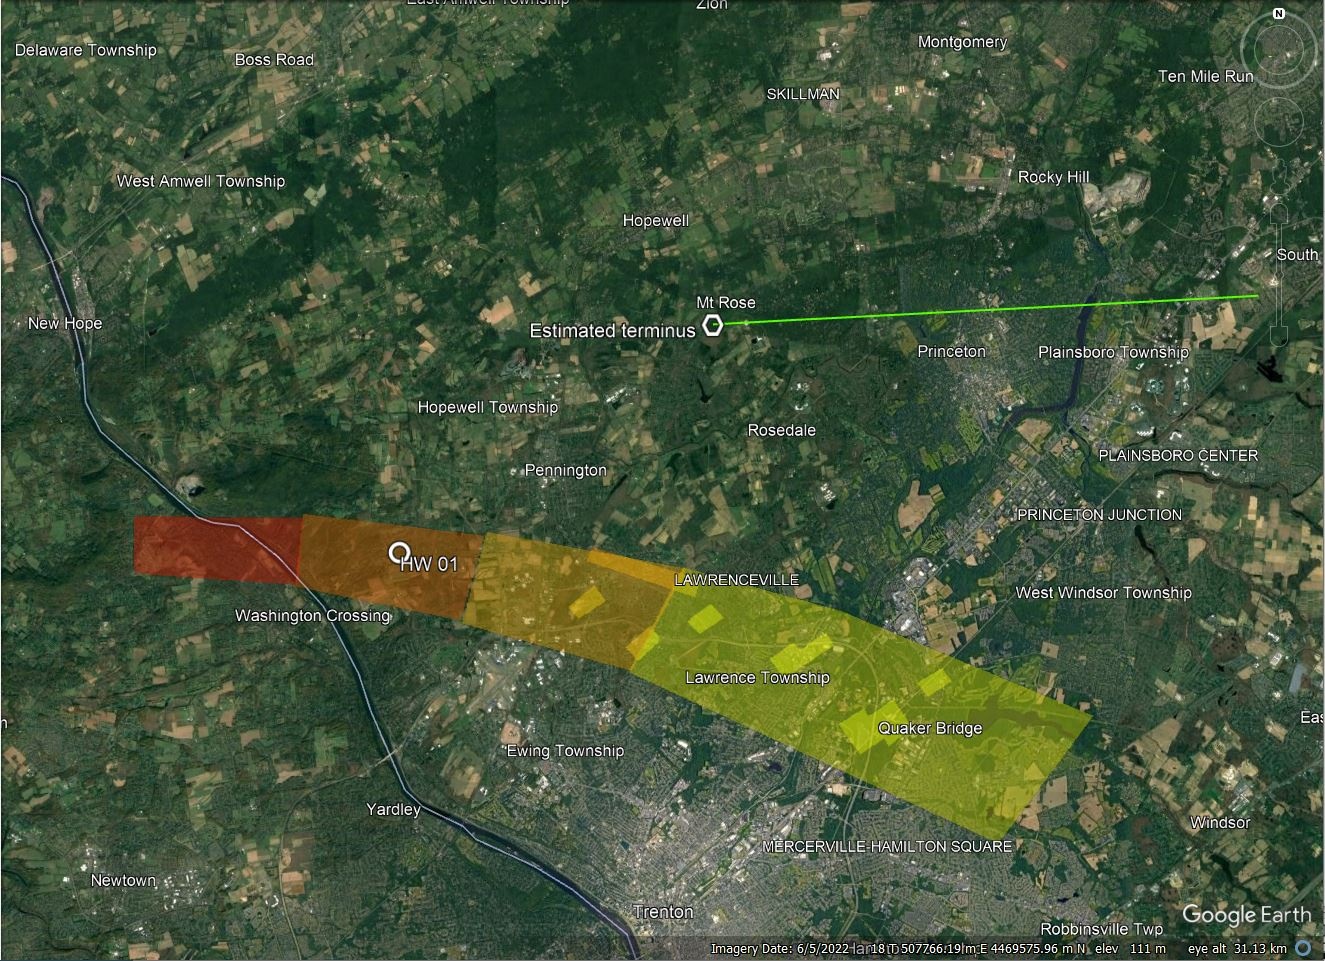 Colors indicate estimated meteorite mass, from red (1 kg) to yellow (1g). 'HW 01' shows where a meteorite struck a house.